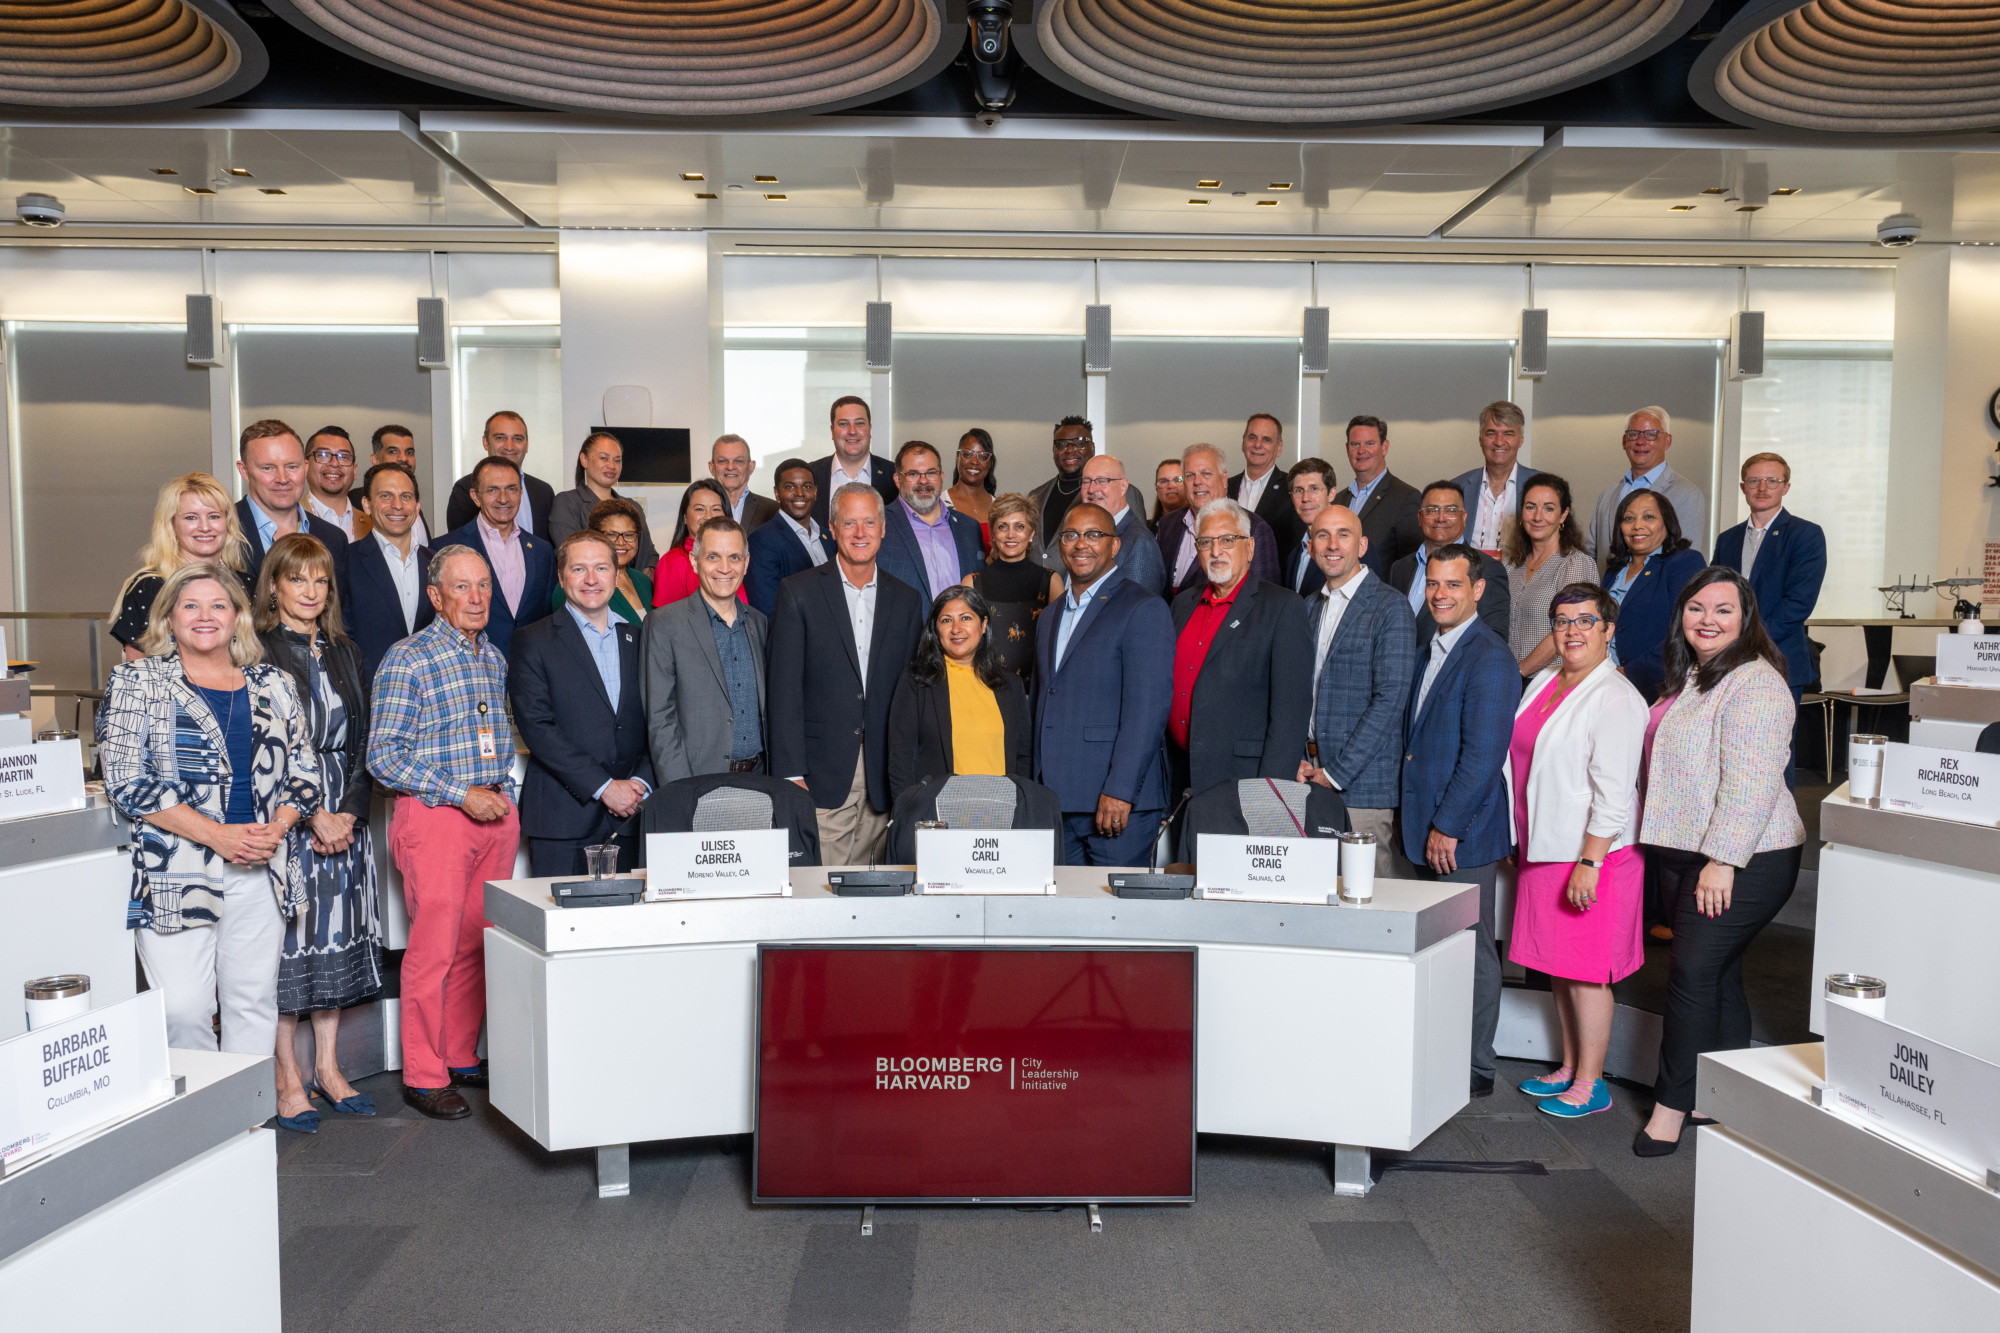 Group portrait of forty mayors in the classroom.